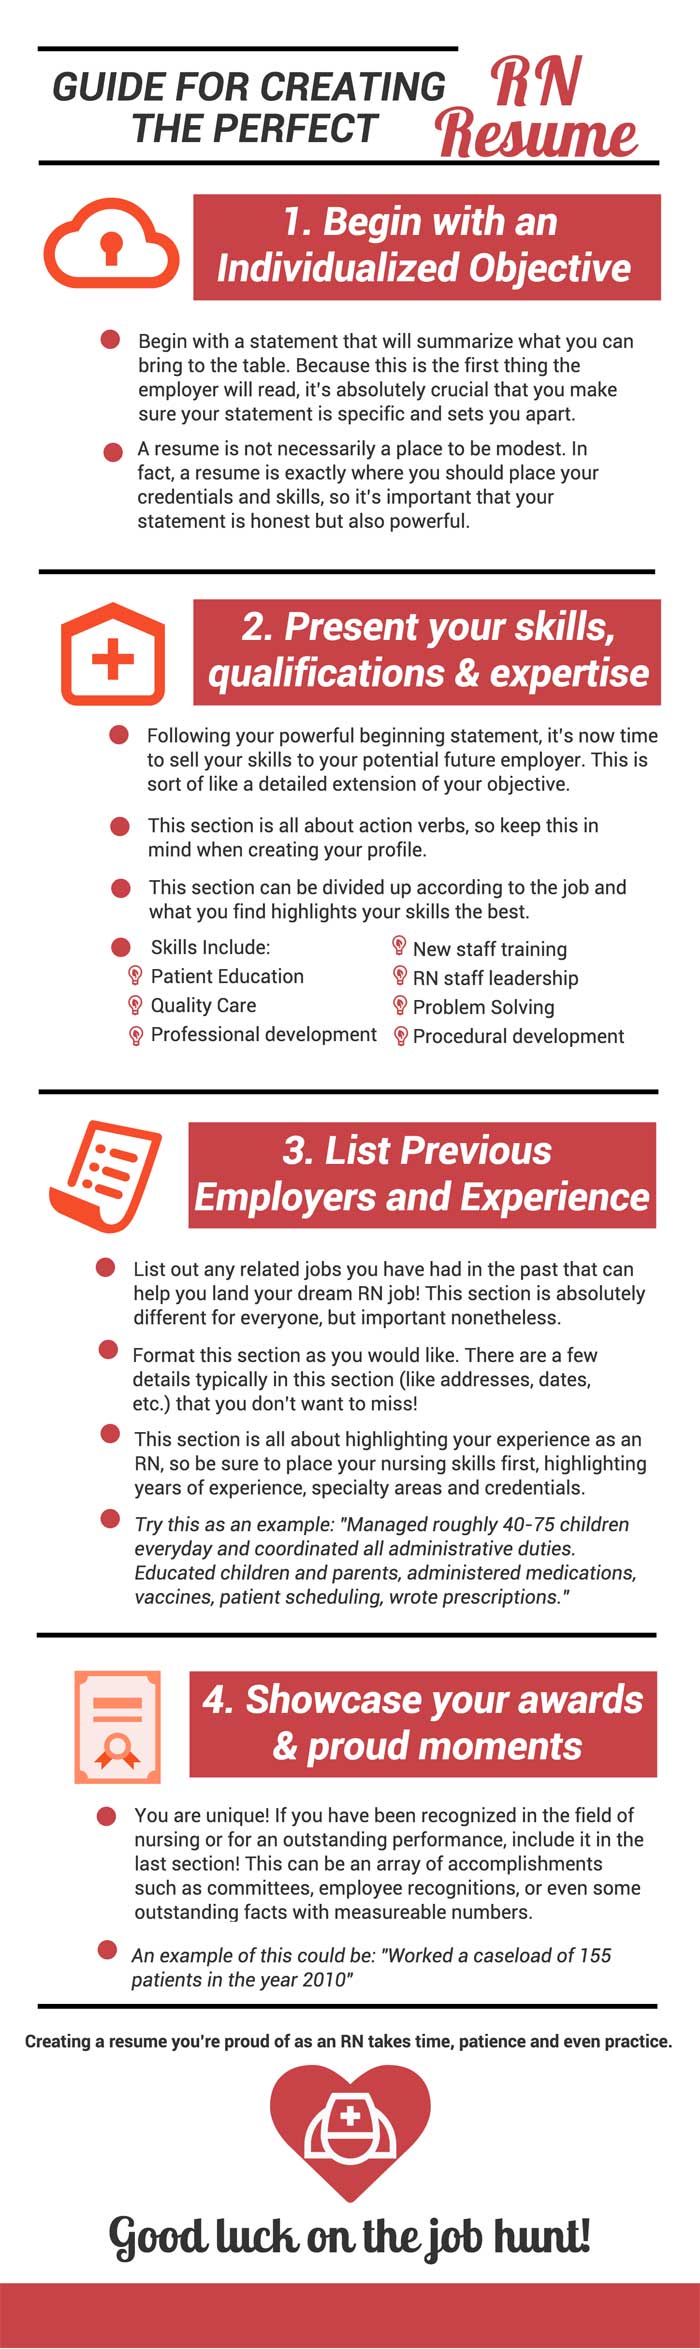 infographic detailing how to create the most successful resume to land a job as a Registered Nurse